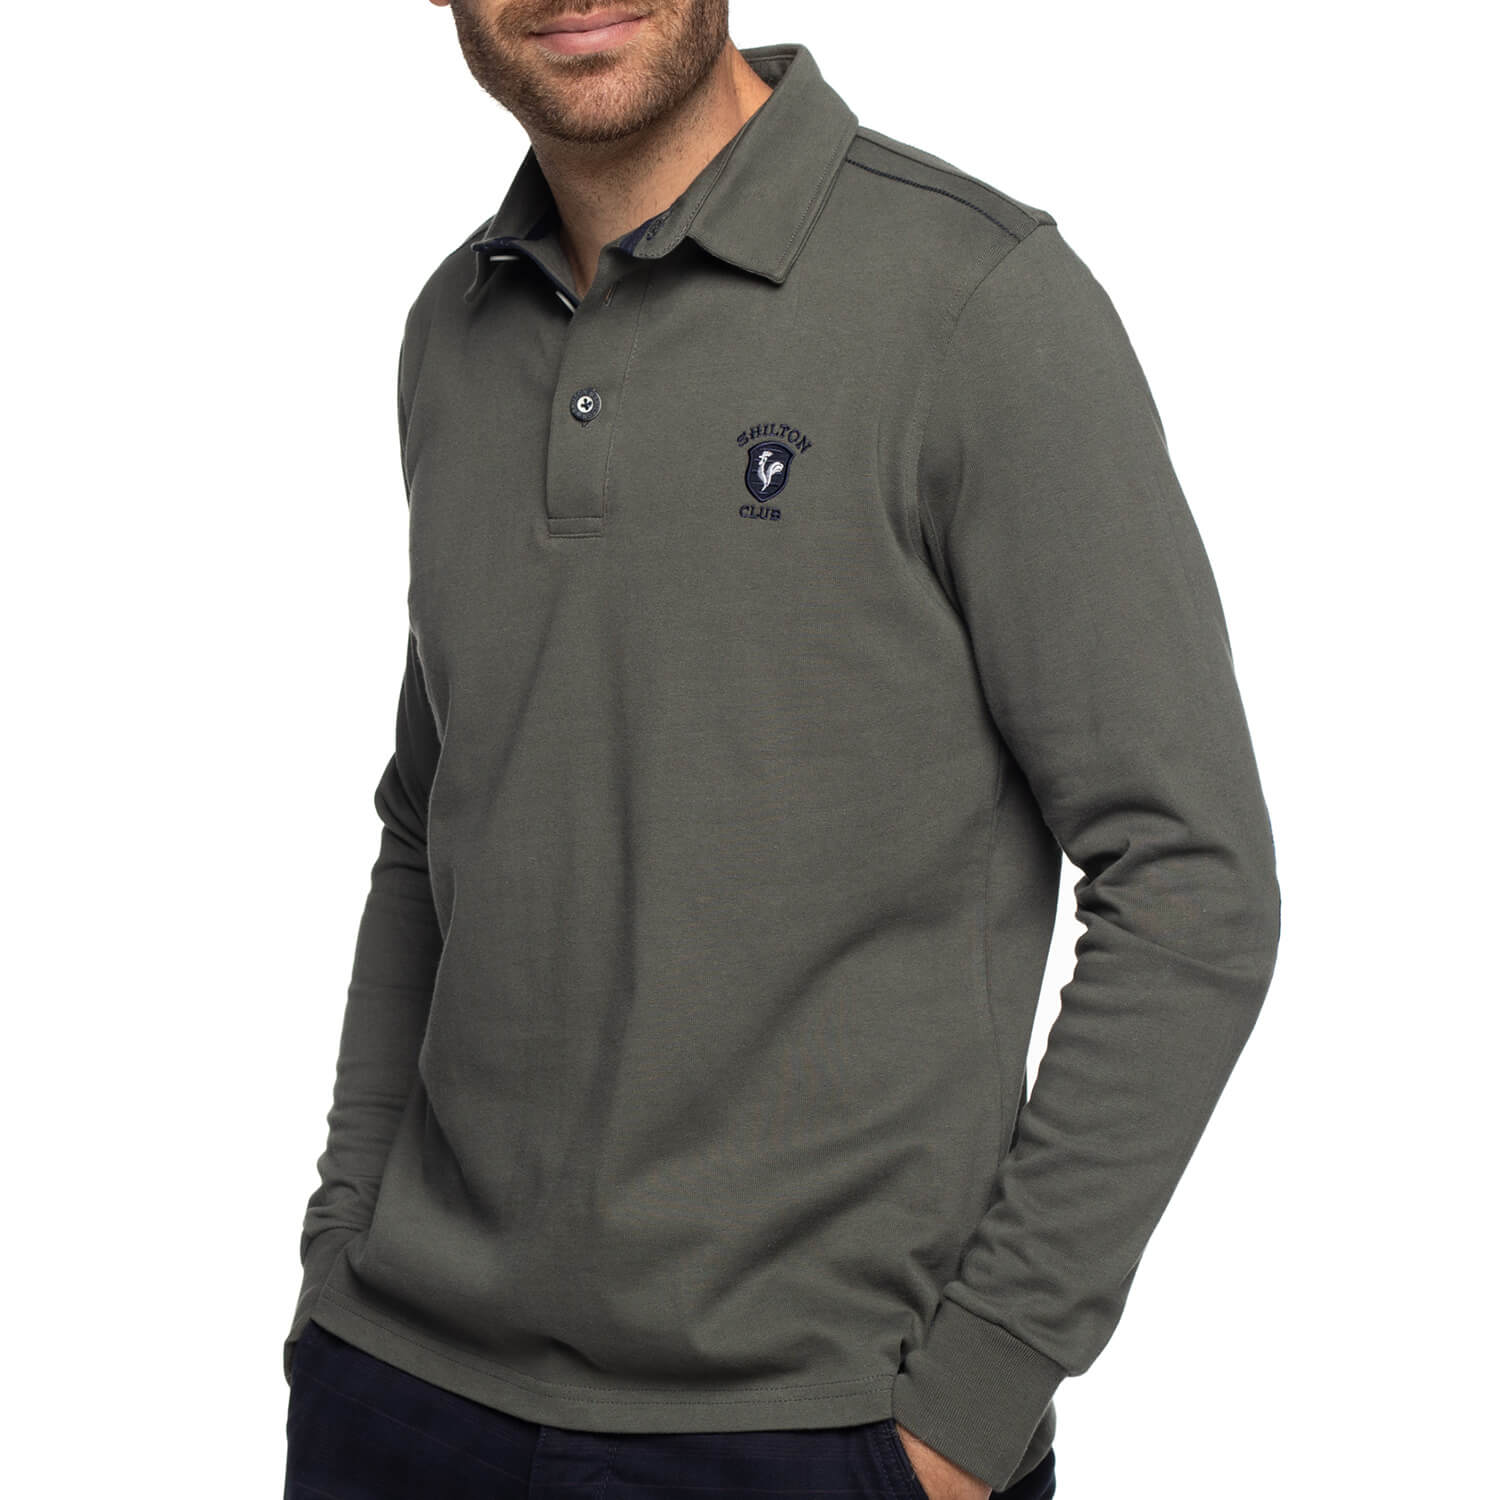 Polo rugby jersey